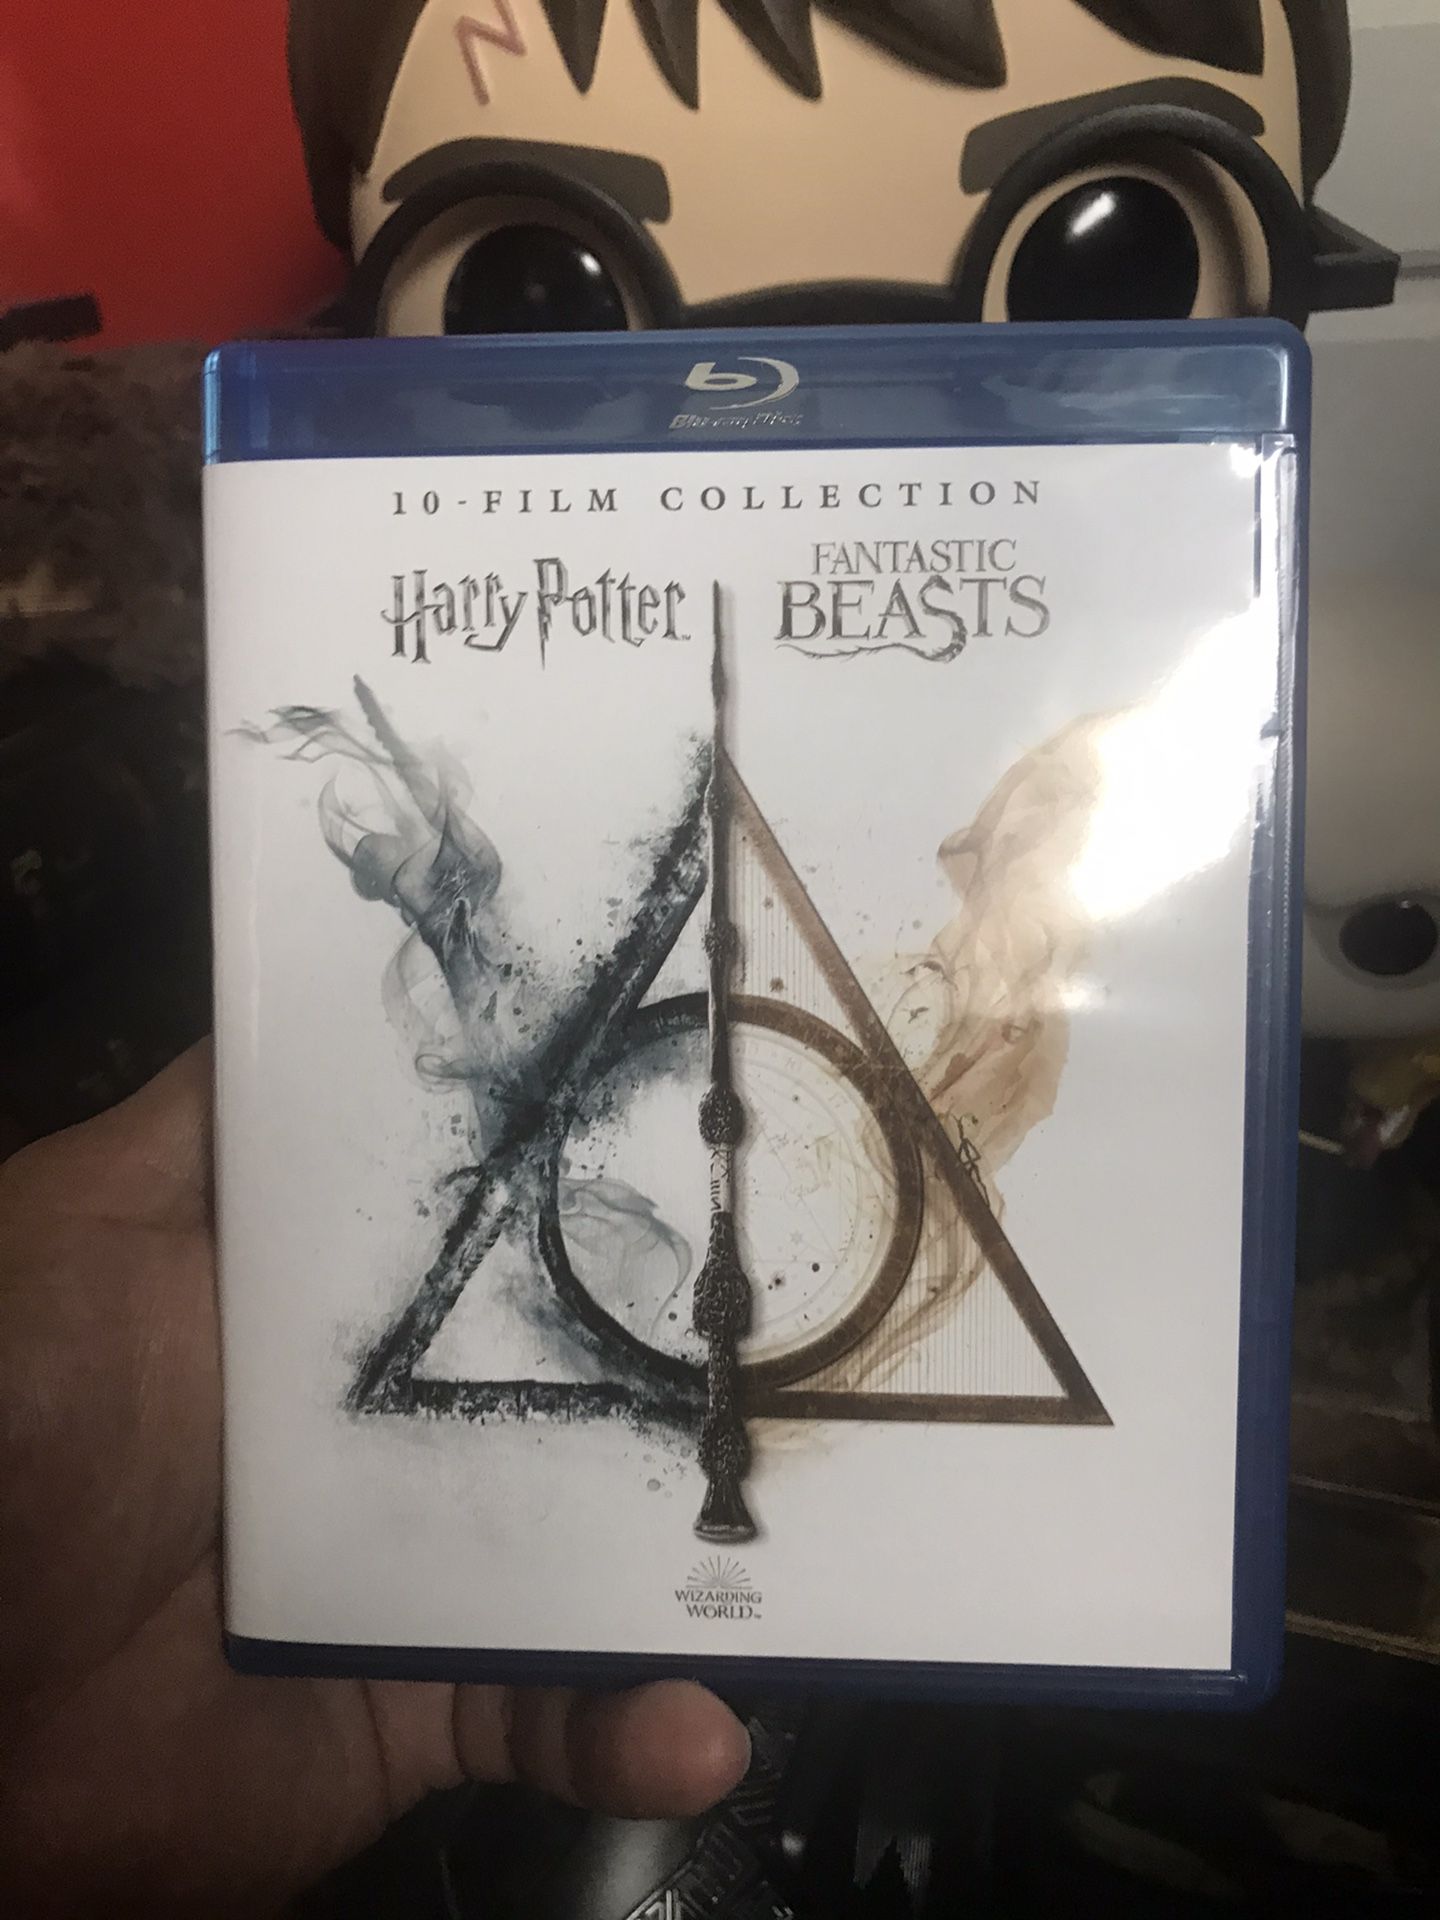 Harry Potter and Fantastic Beasts movies in Blu-ray 1-10, Disney Marvel DC Harry Potter the Star Wars movies 3D Bluray and dvd collectors !stay safe!